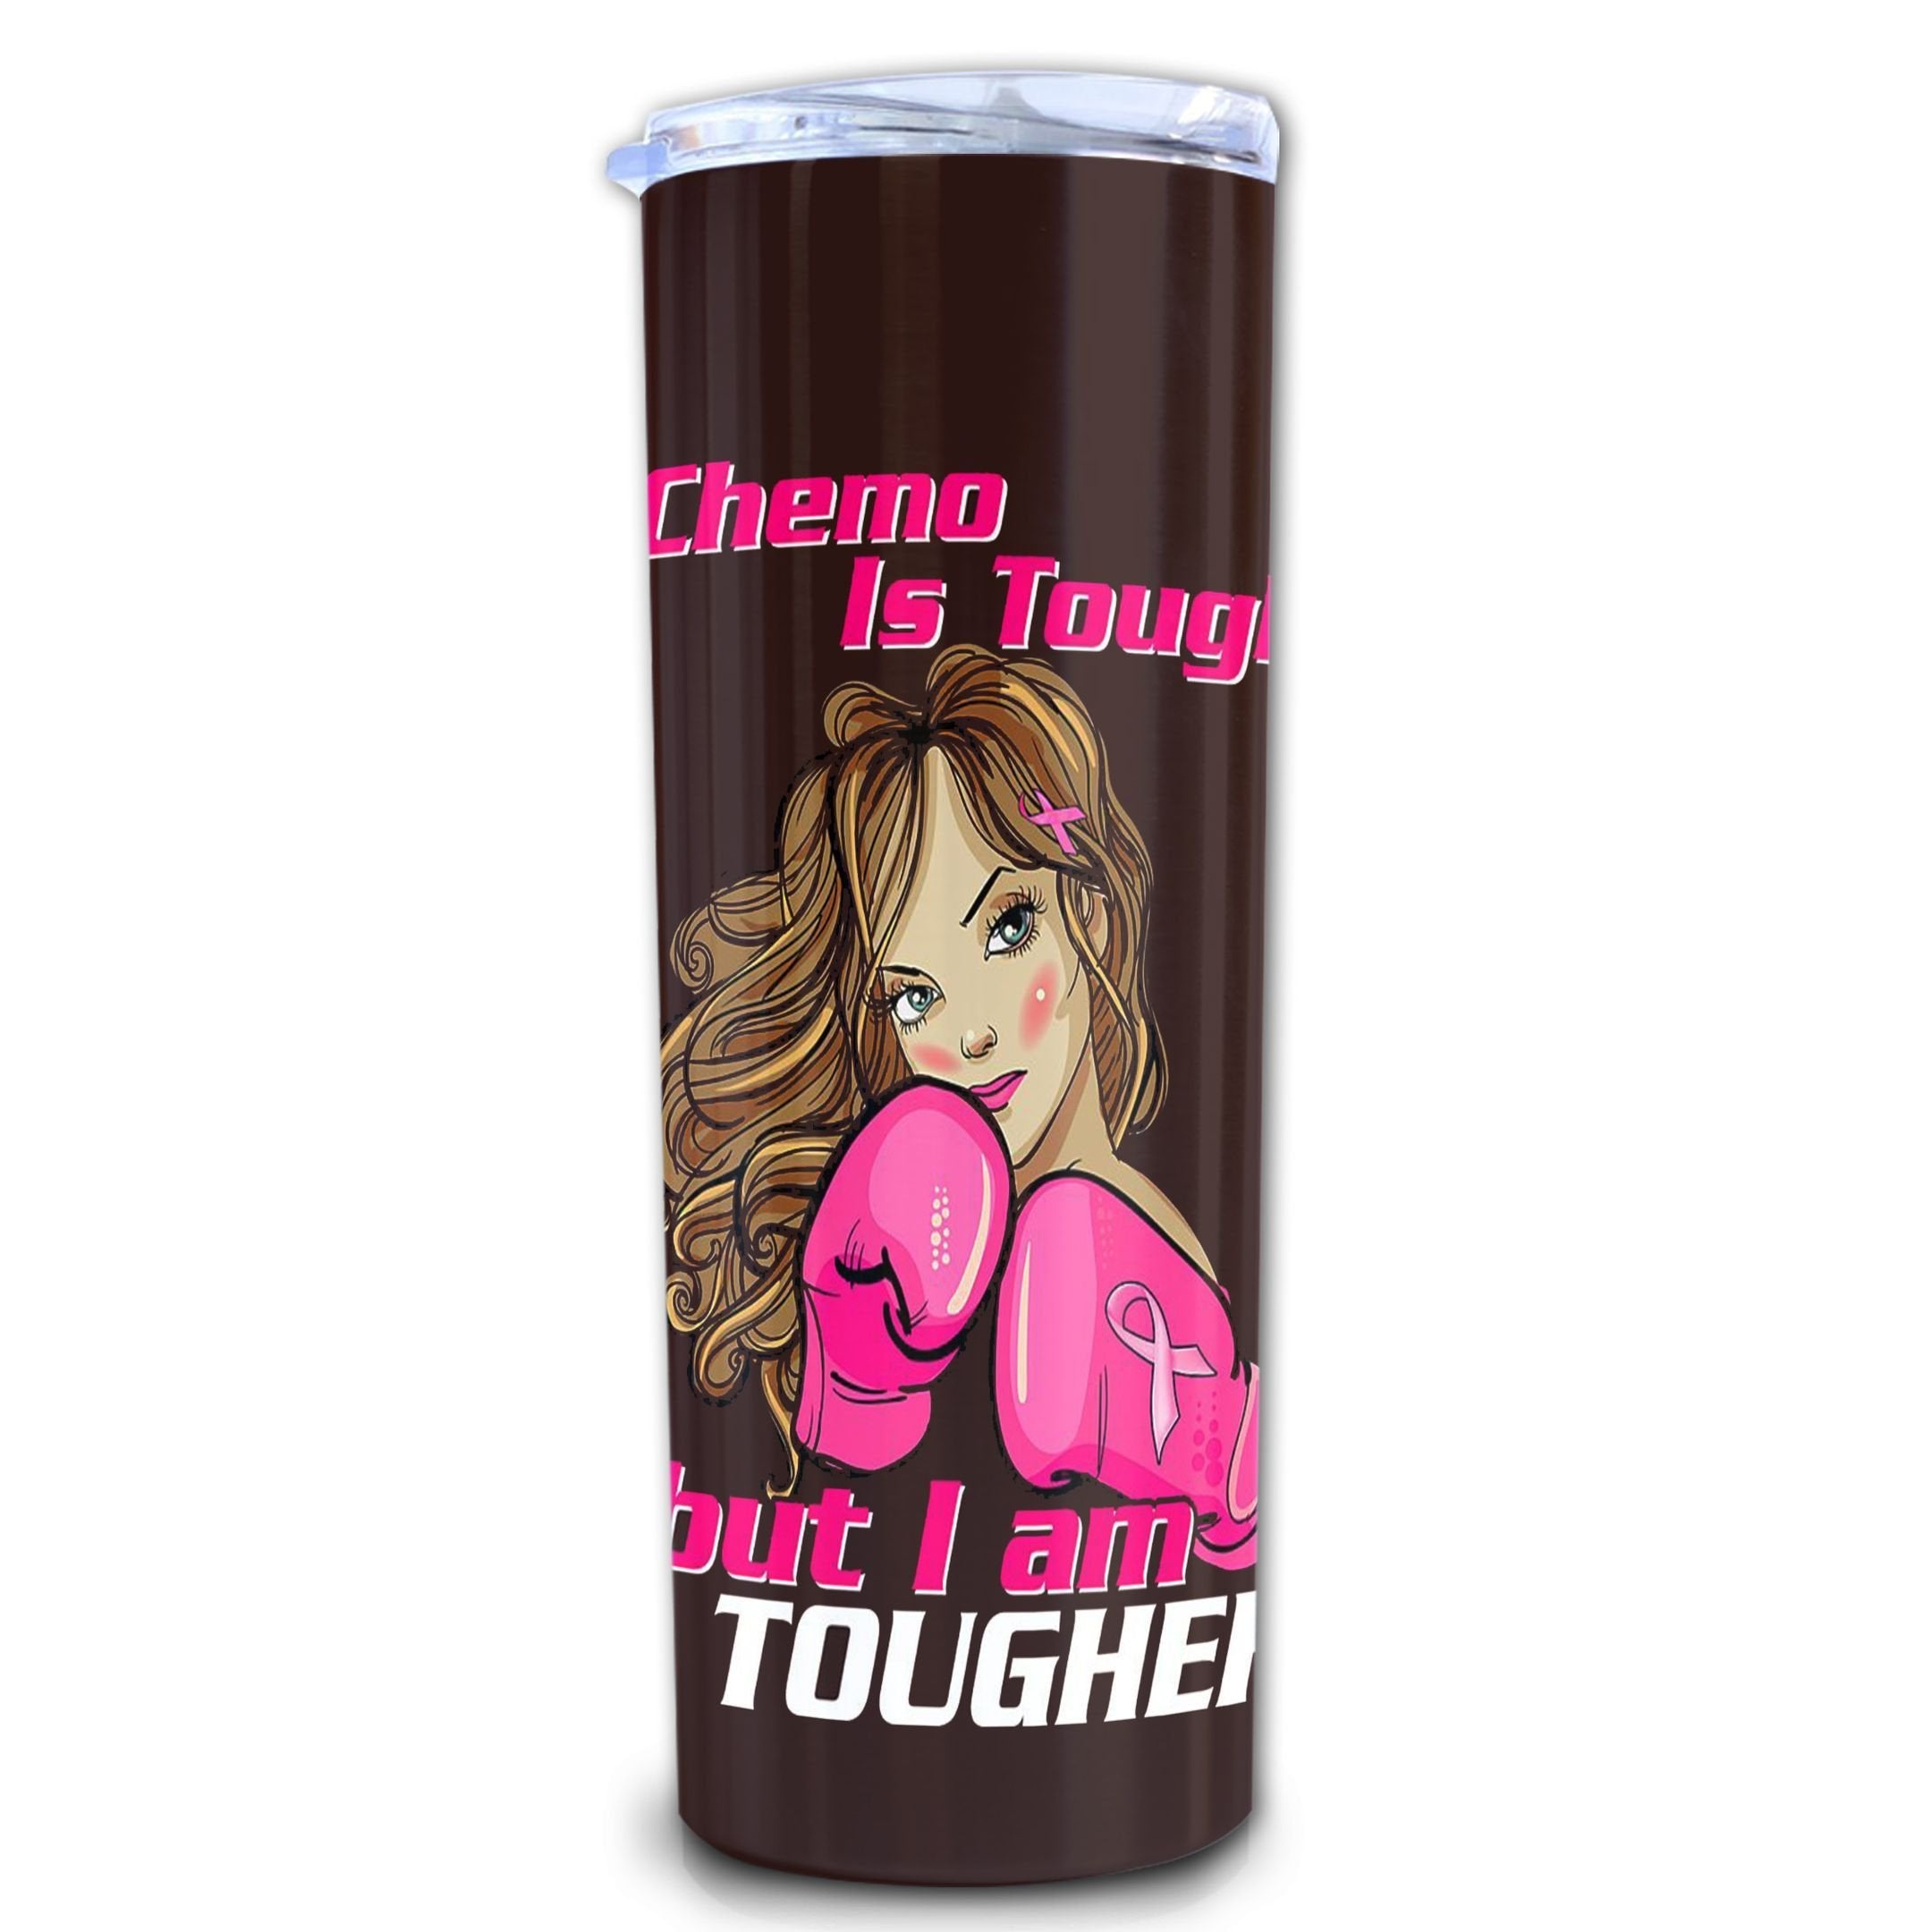 Chemo Is Tough But I Am Tougher Skinny Tumbler, Breast Cancer Awareness Tumbler